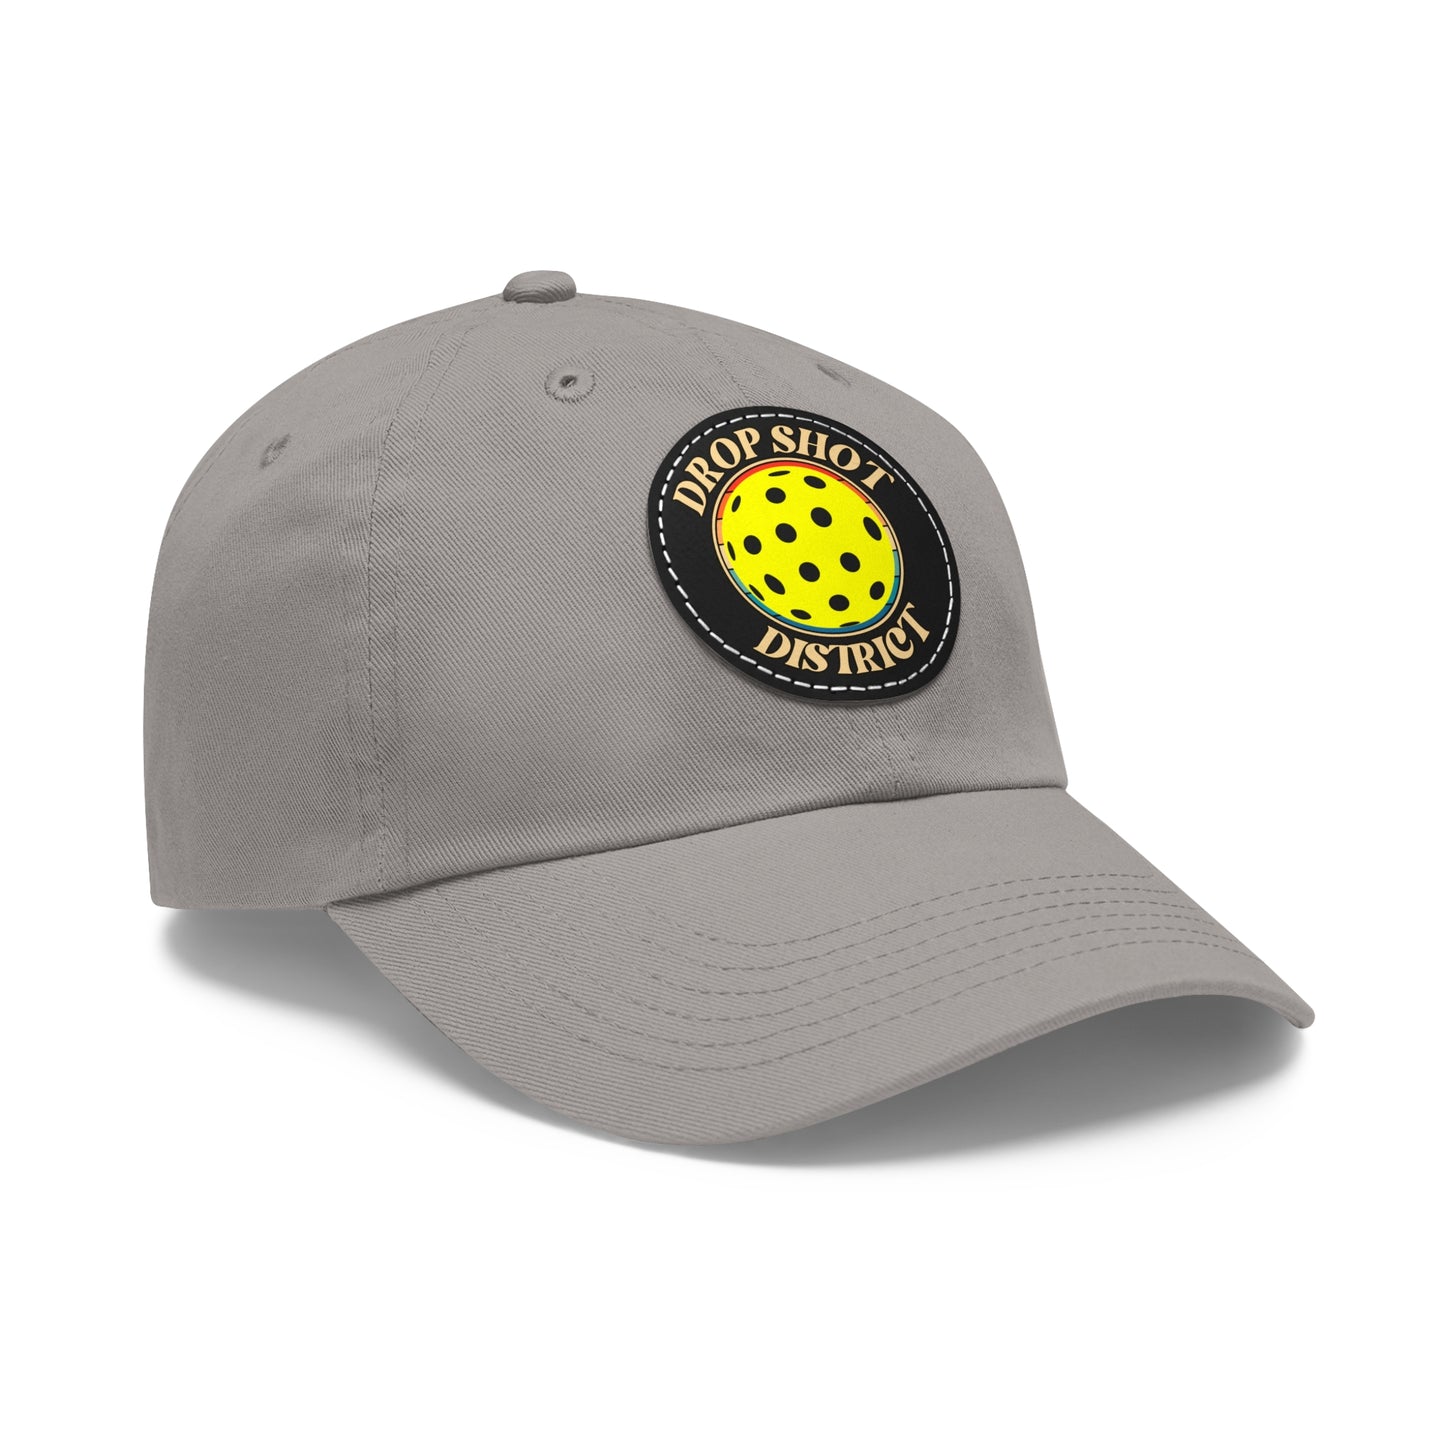 Drop Shot District Pickleball Logo Hat Printed with Leather Patch